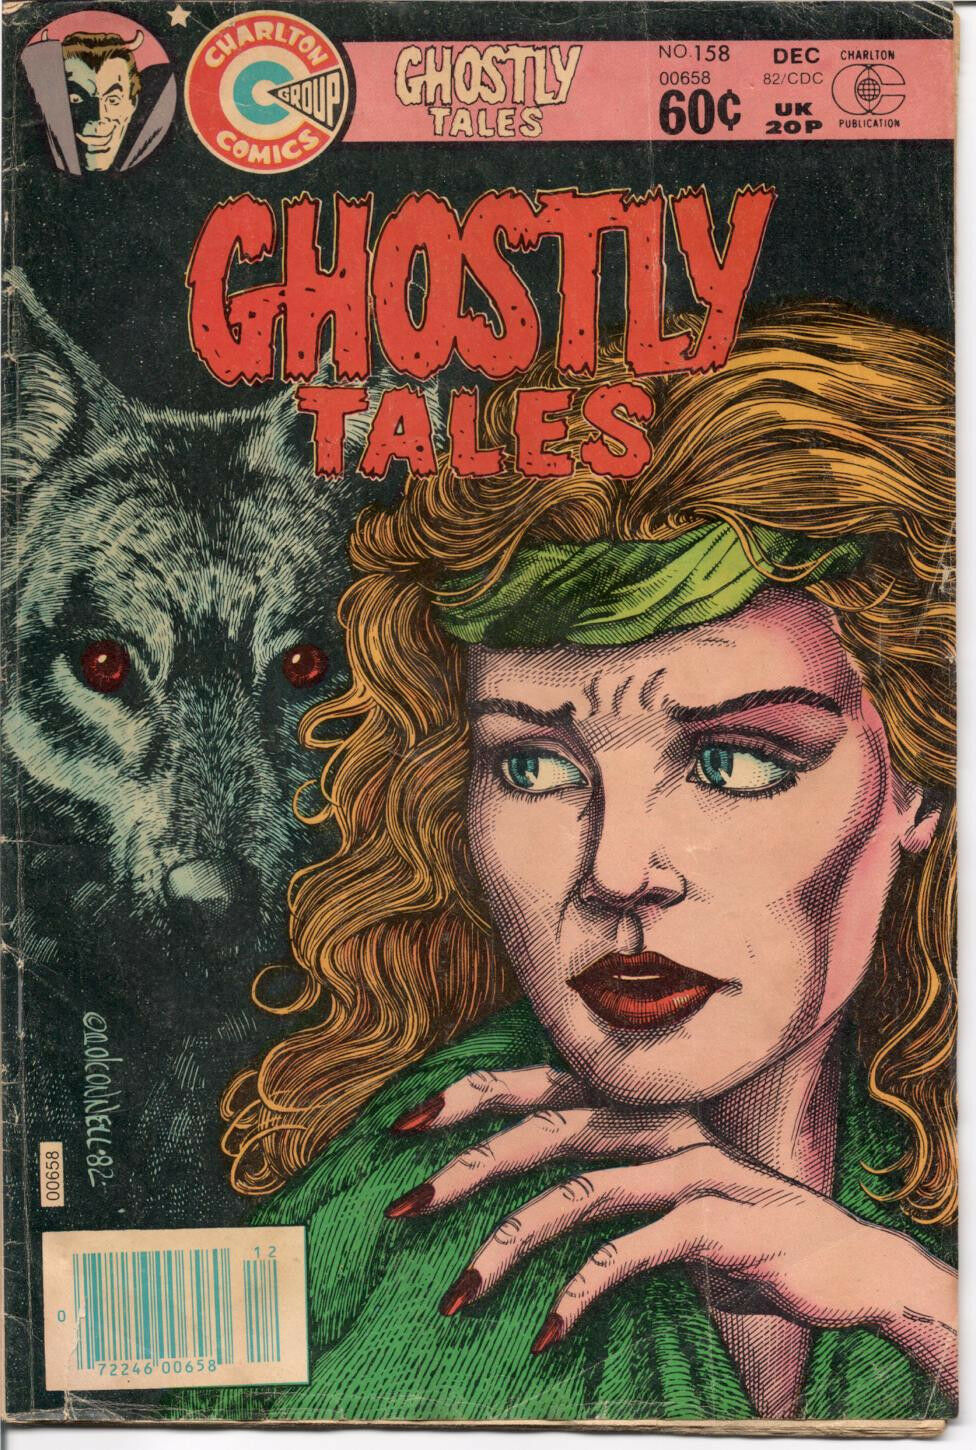 Ghostly Tales no. 158  - 1982 Charlton Comics fair condition - sold as is - $5.90